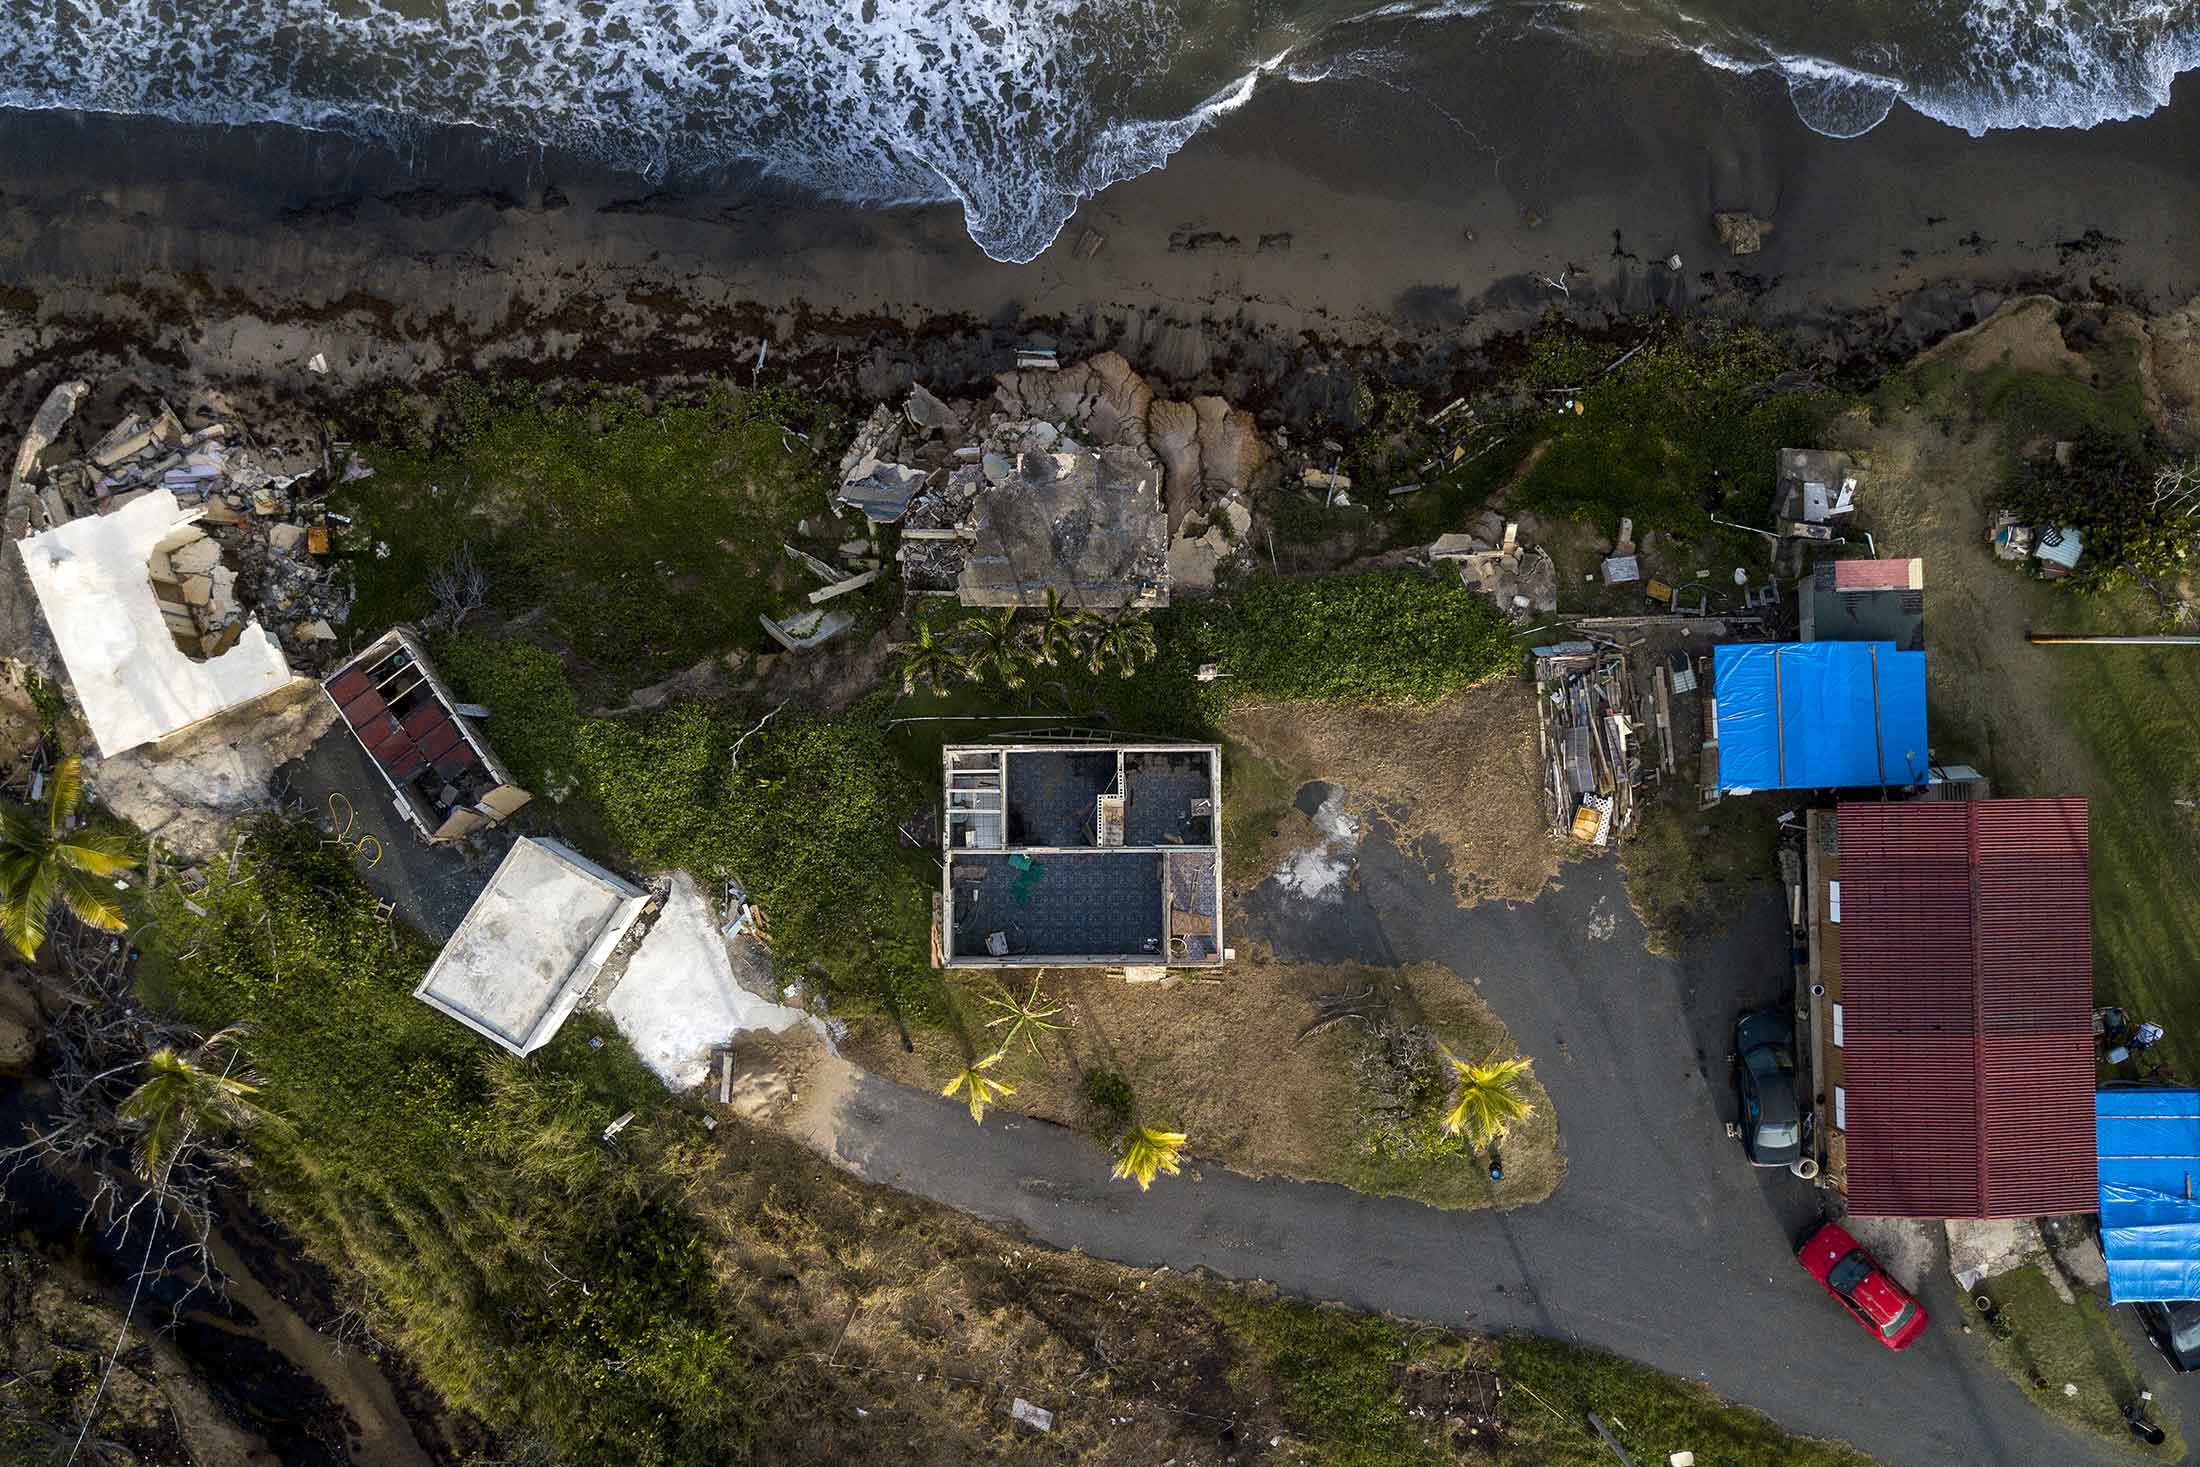 Homes damaged by Hurricane Maria are seen in an aerial photograph taken over El Negro, Yabucoa, Puerto Rico, on Sept. 17, 2018.